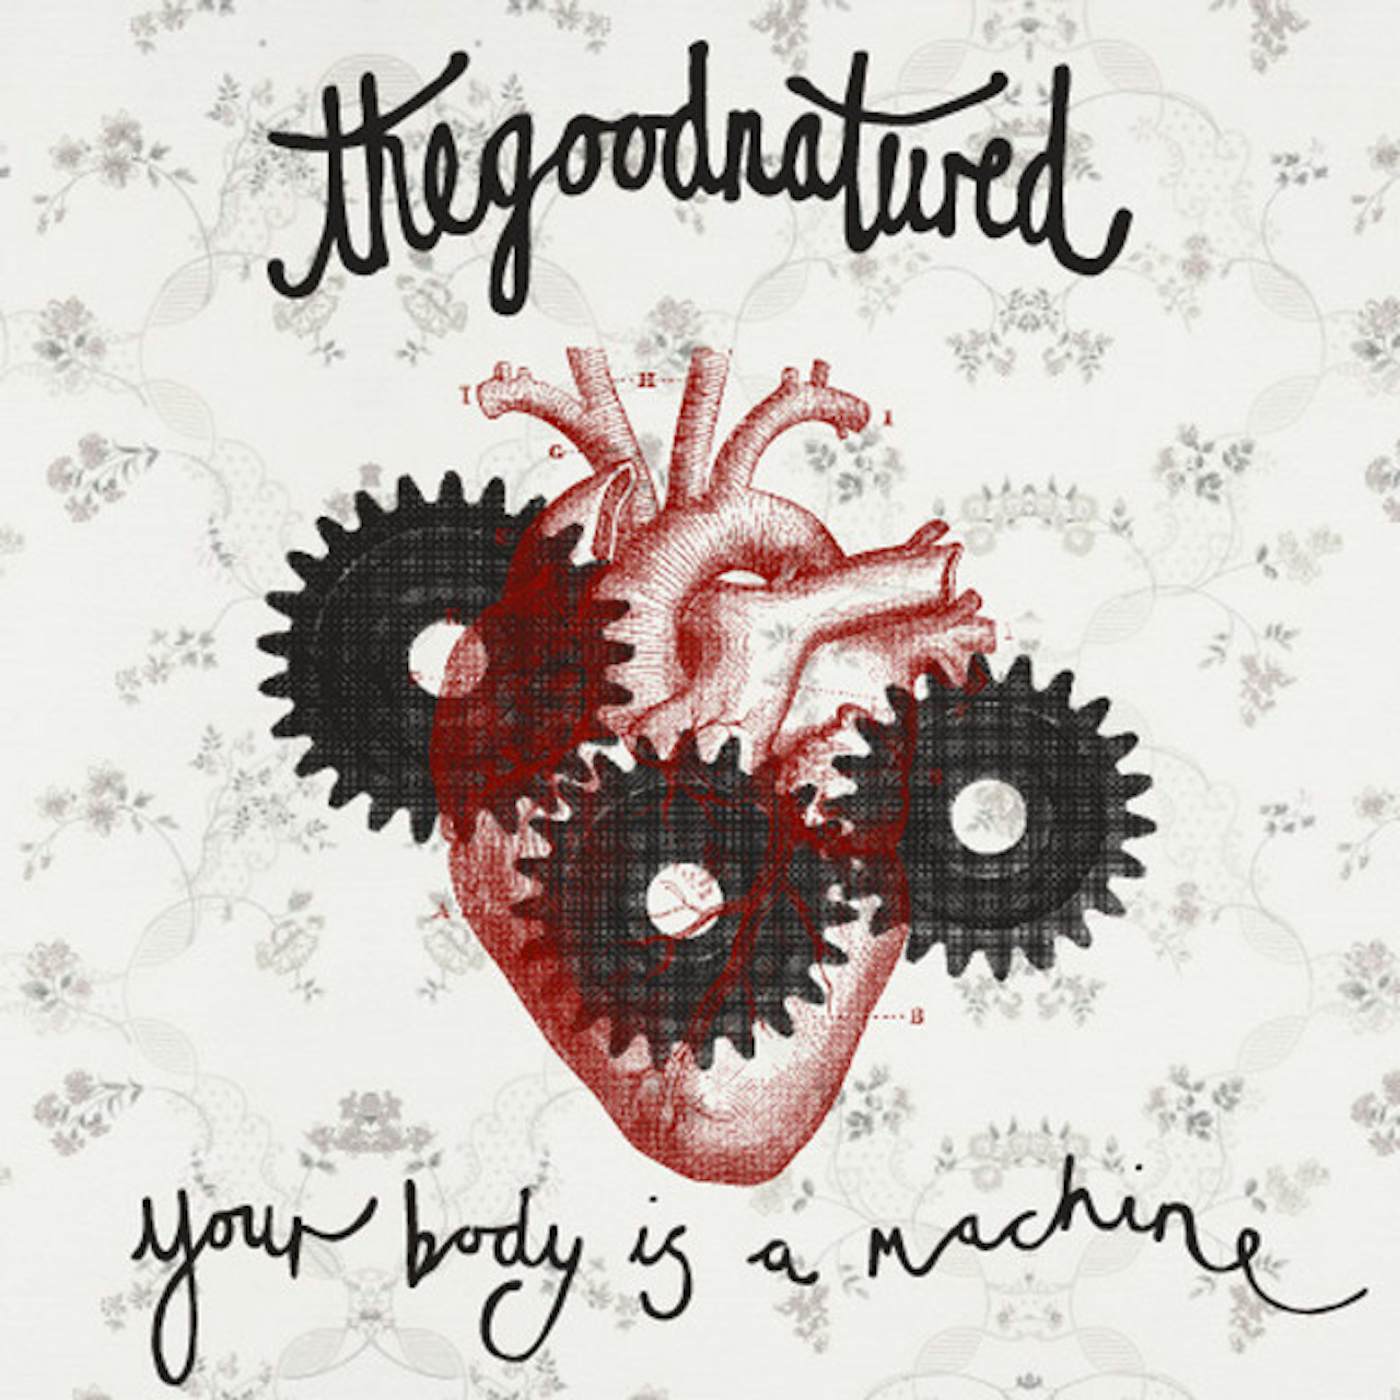 The Good Natured Your Body Is A Machine Vinyl Record